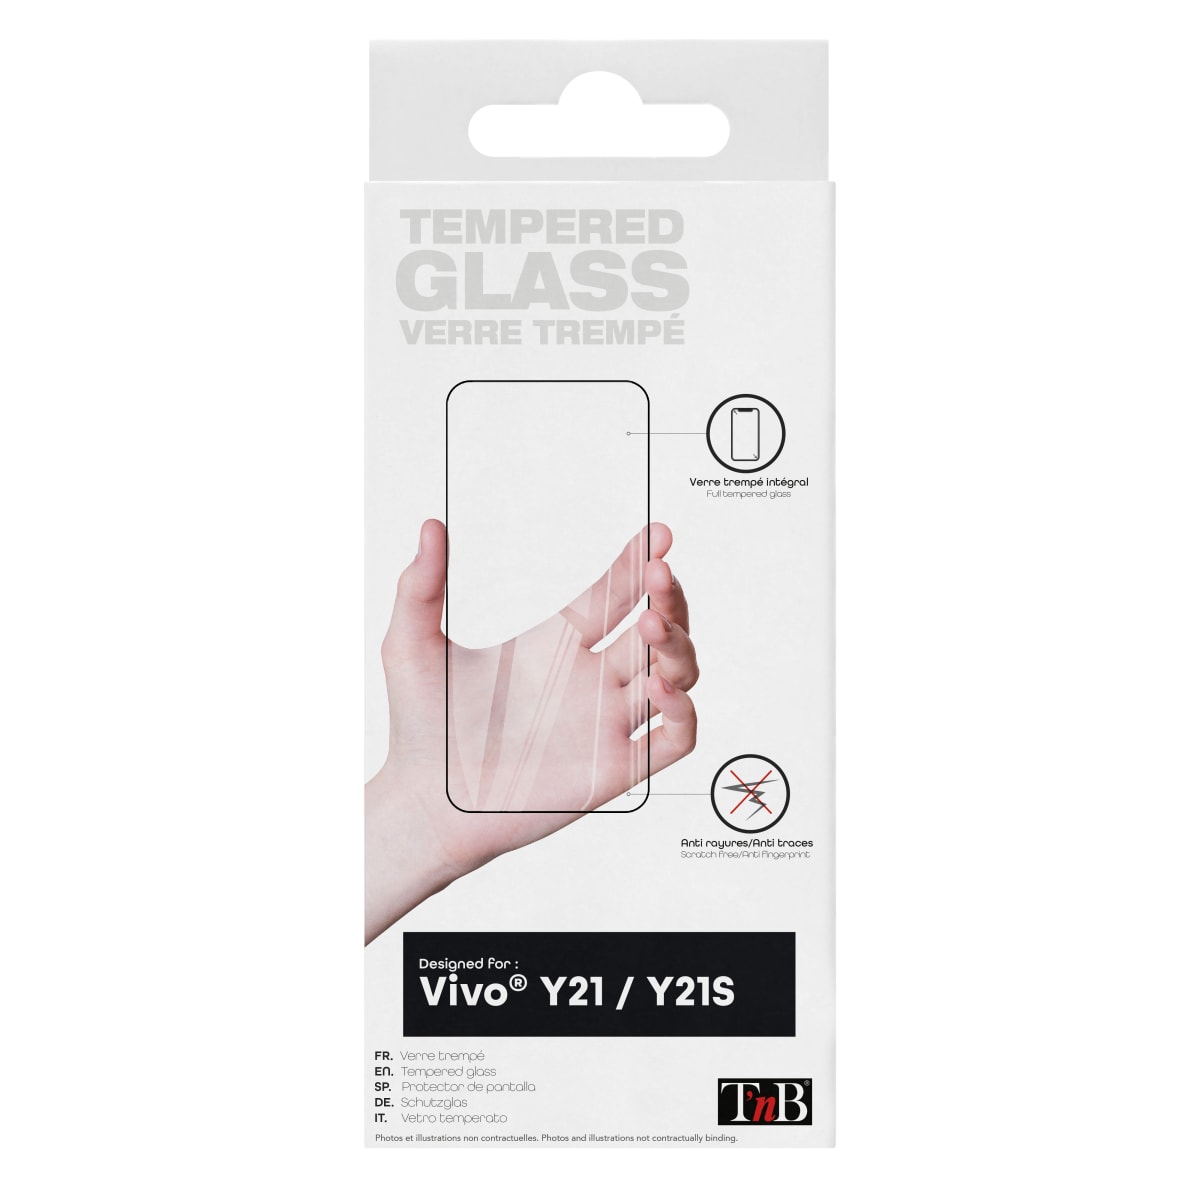 Tempered glass protection for Vivo Y21 / Y21S